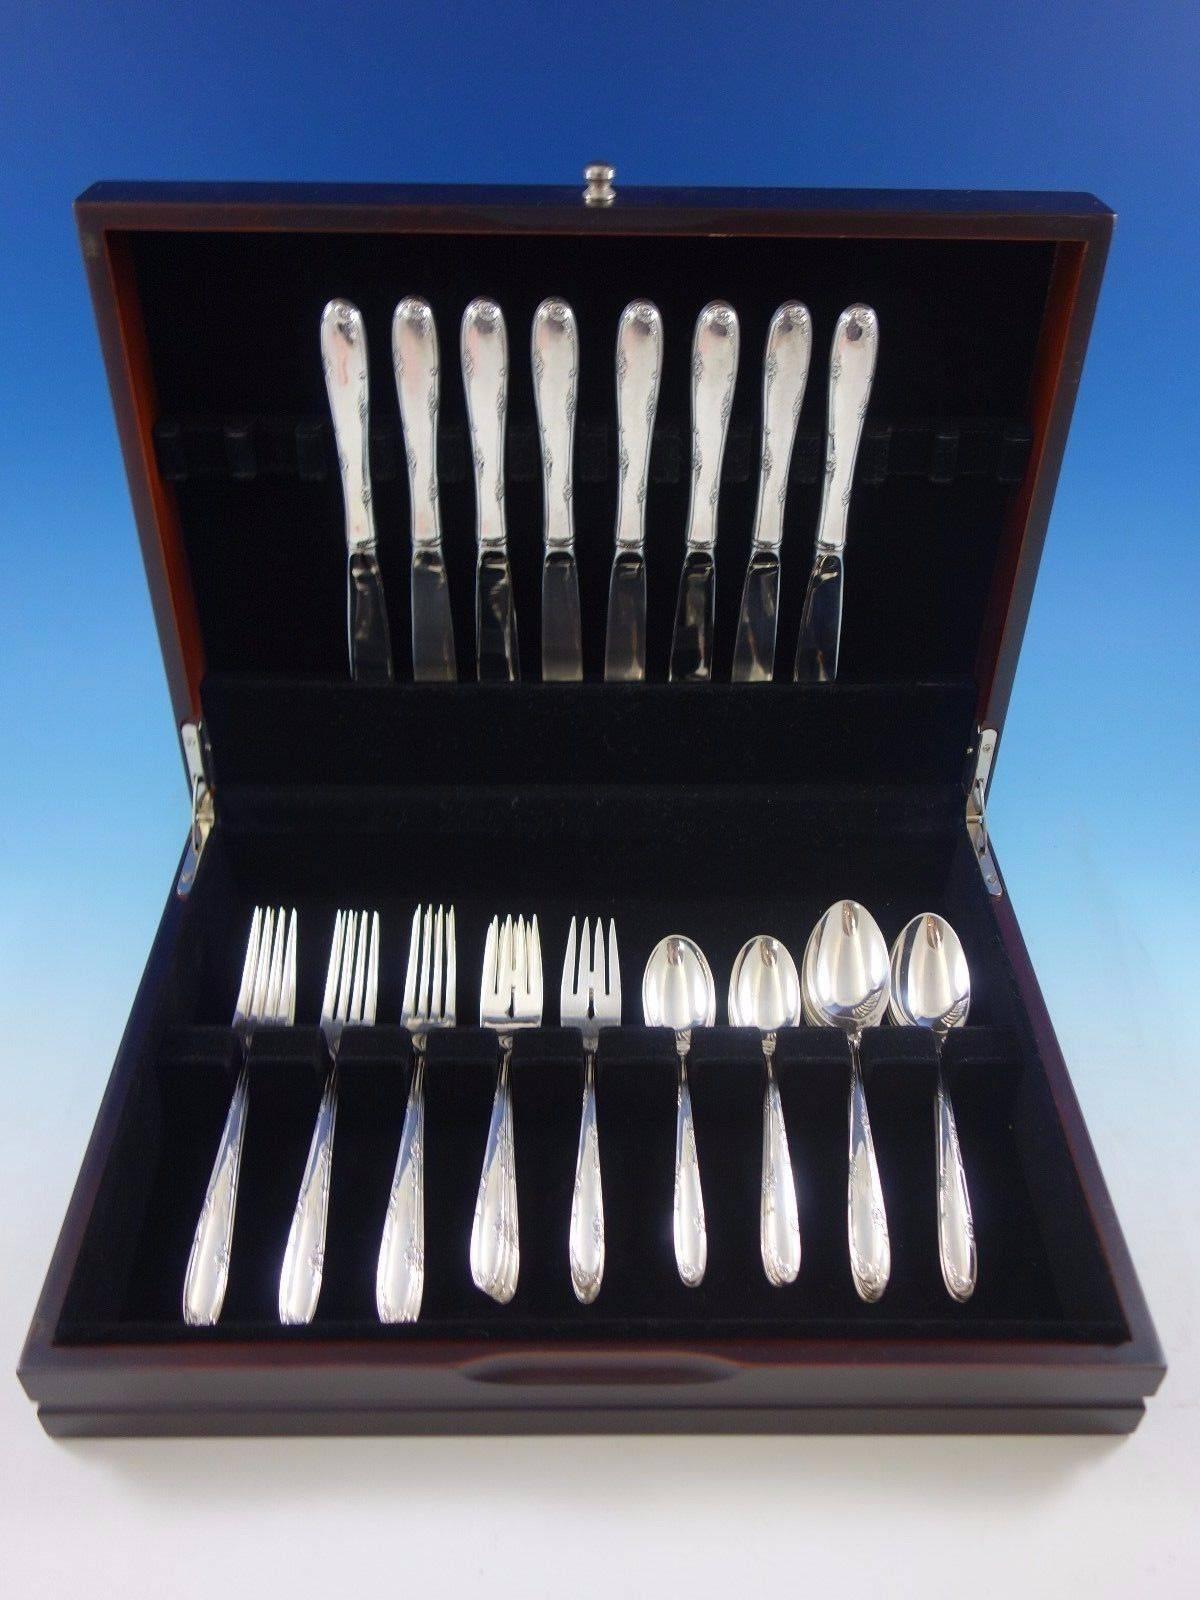 Madeira by Towle sterling silver flatware set of 40 pieces. This set includes: 

Eight knives, 9